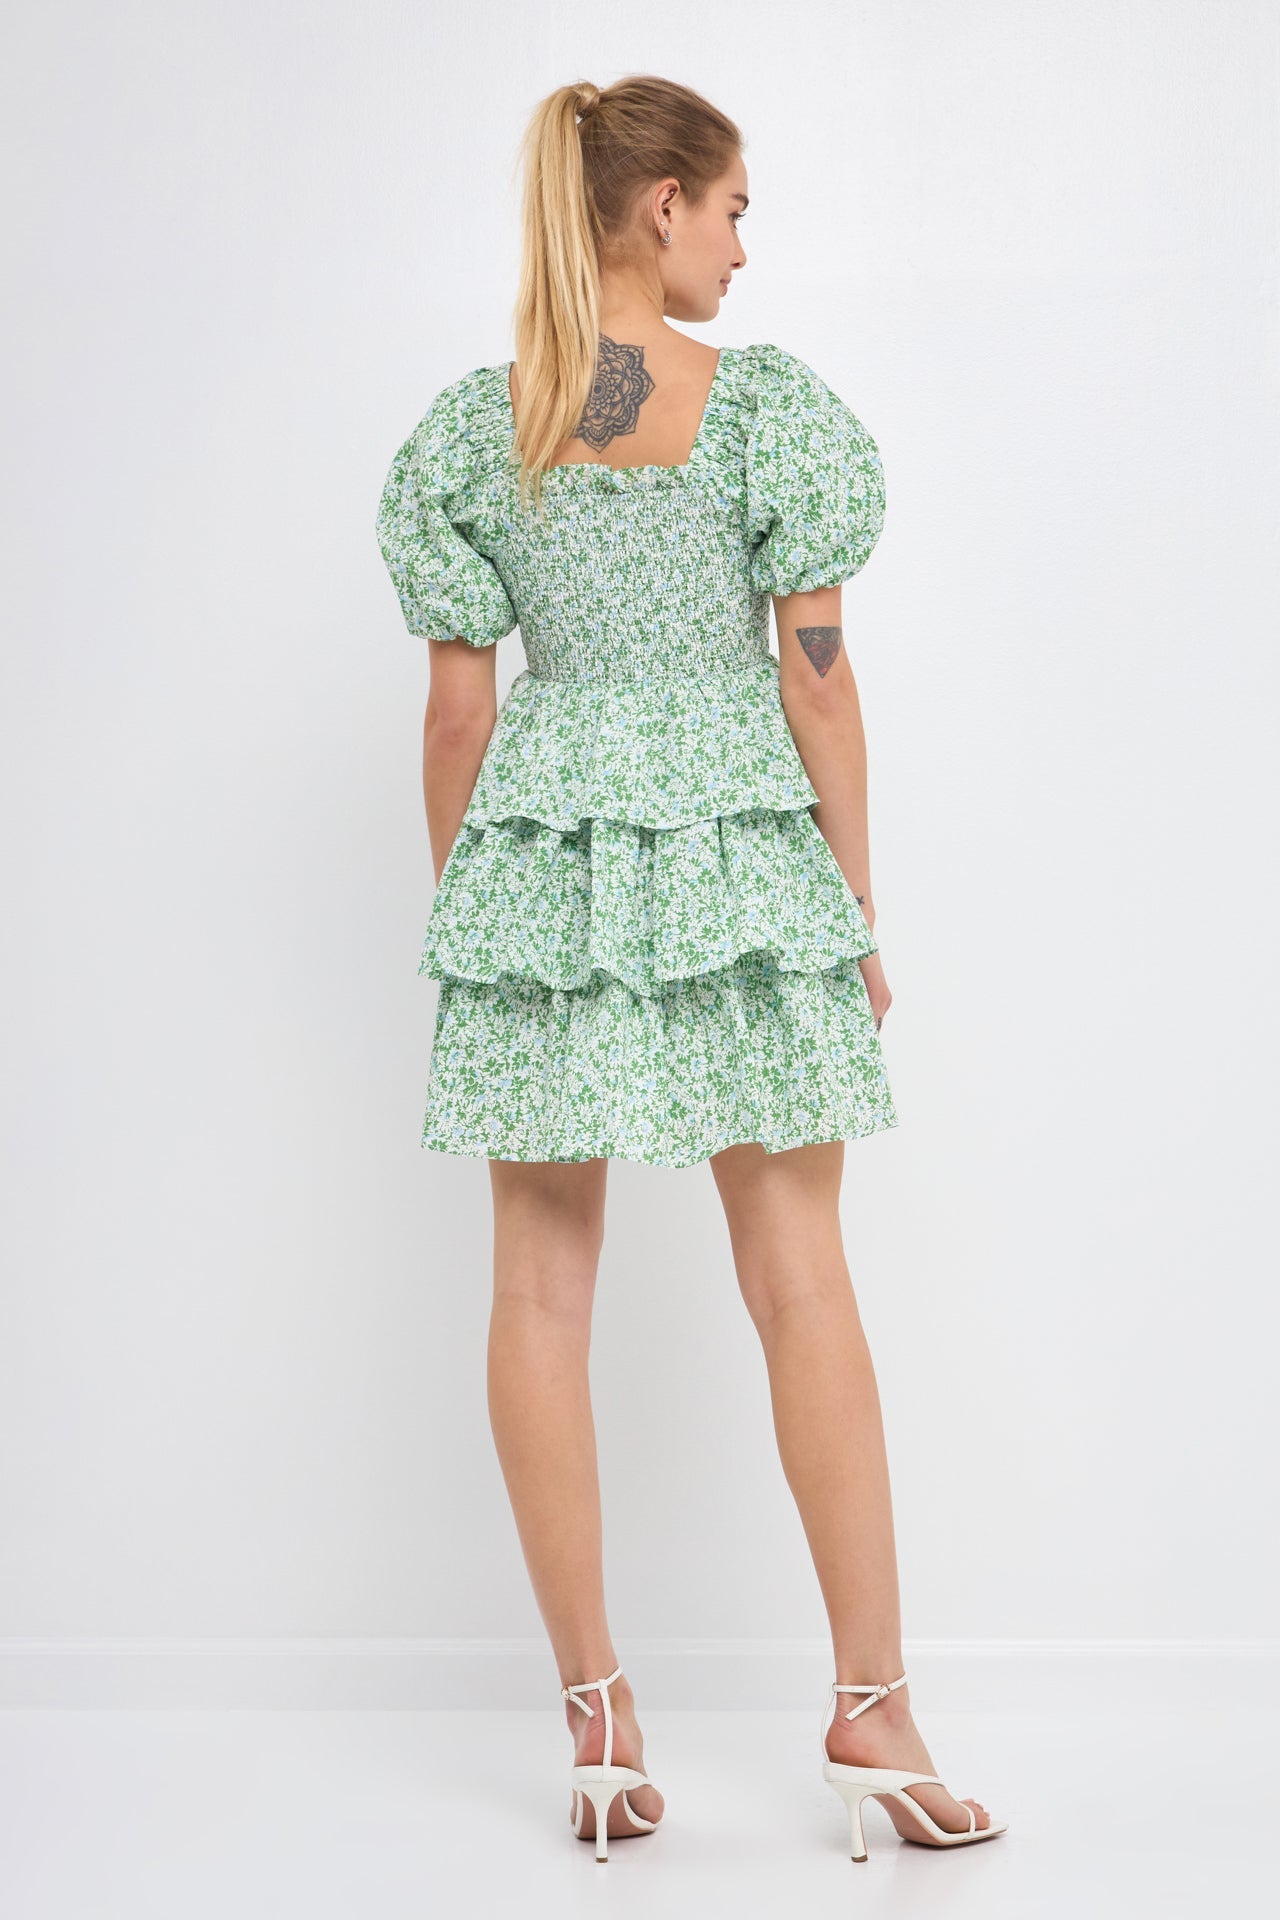 FREE THE ROSES - Crinkled Floral Linen Smocked Tiered Mini - DRESSES available at Objectrare